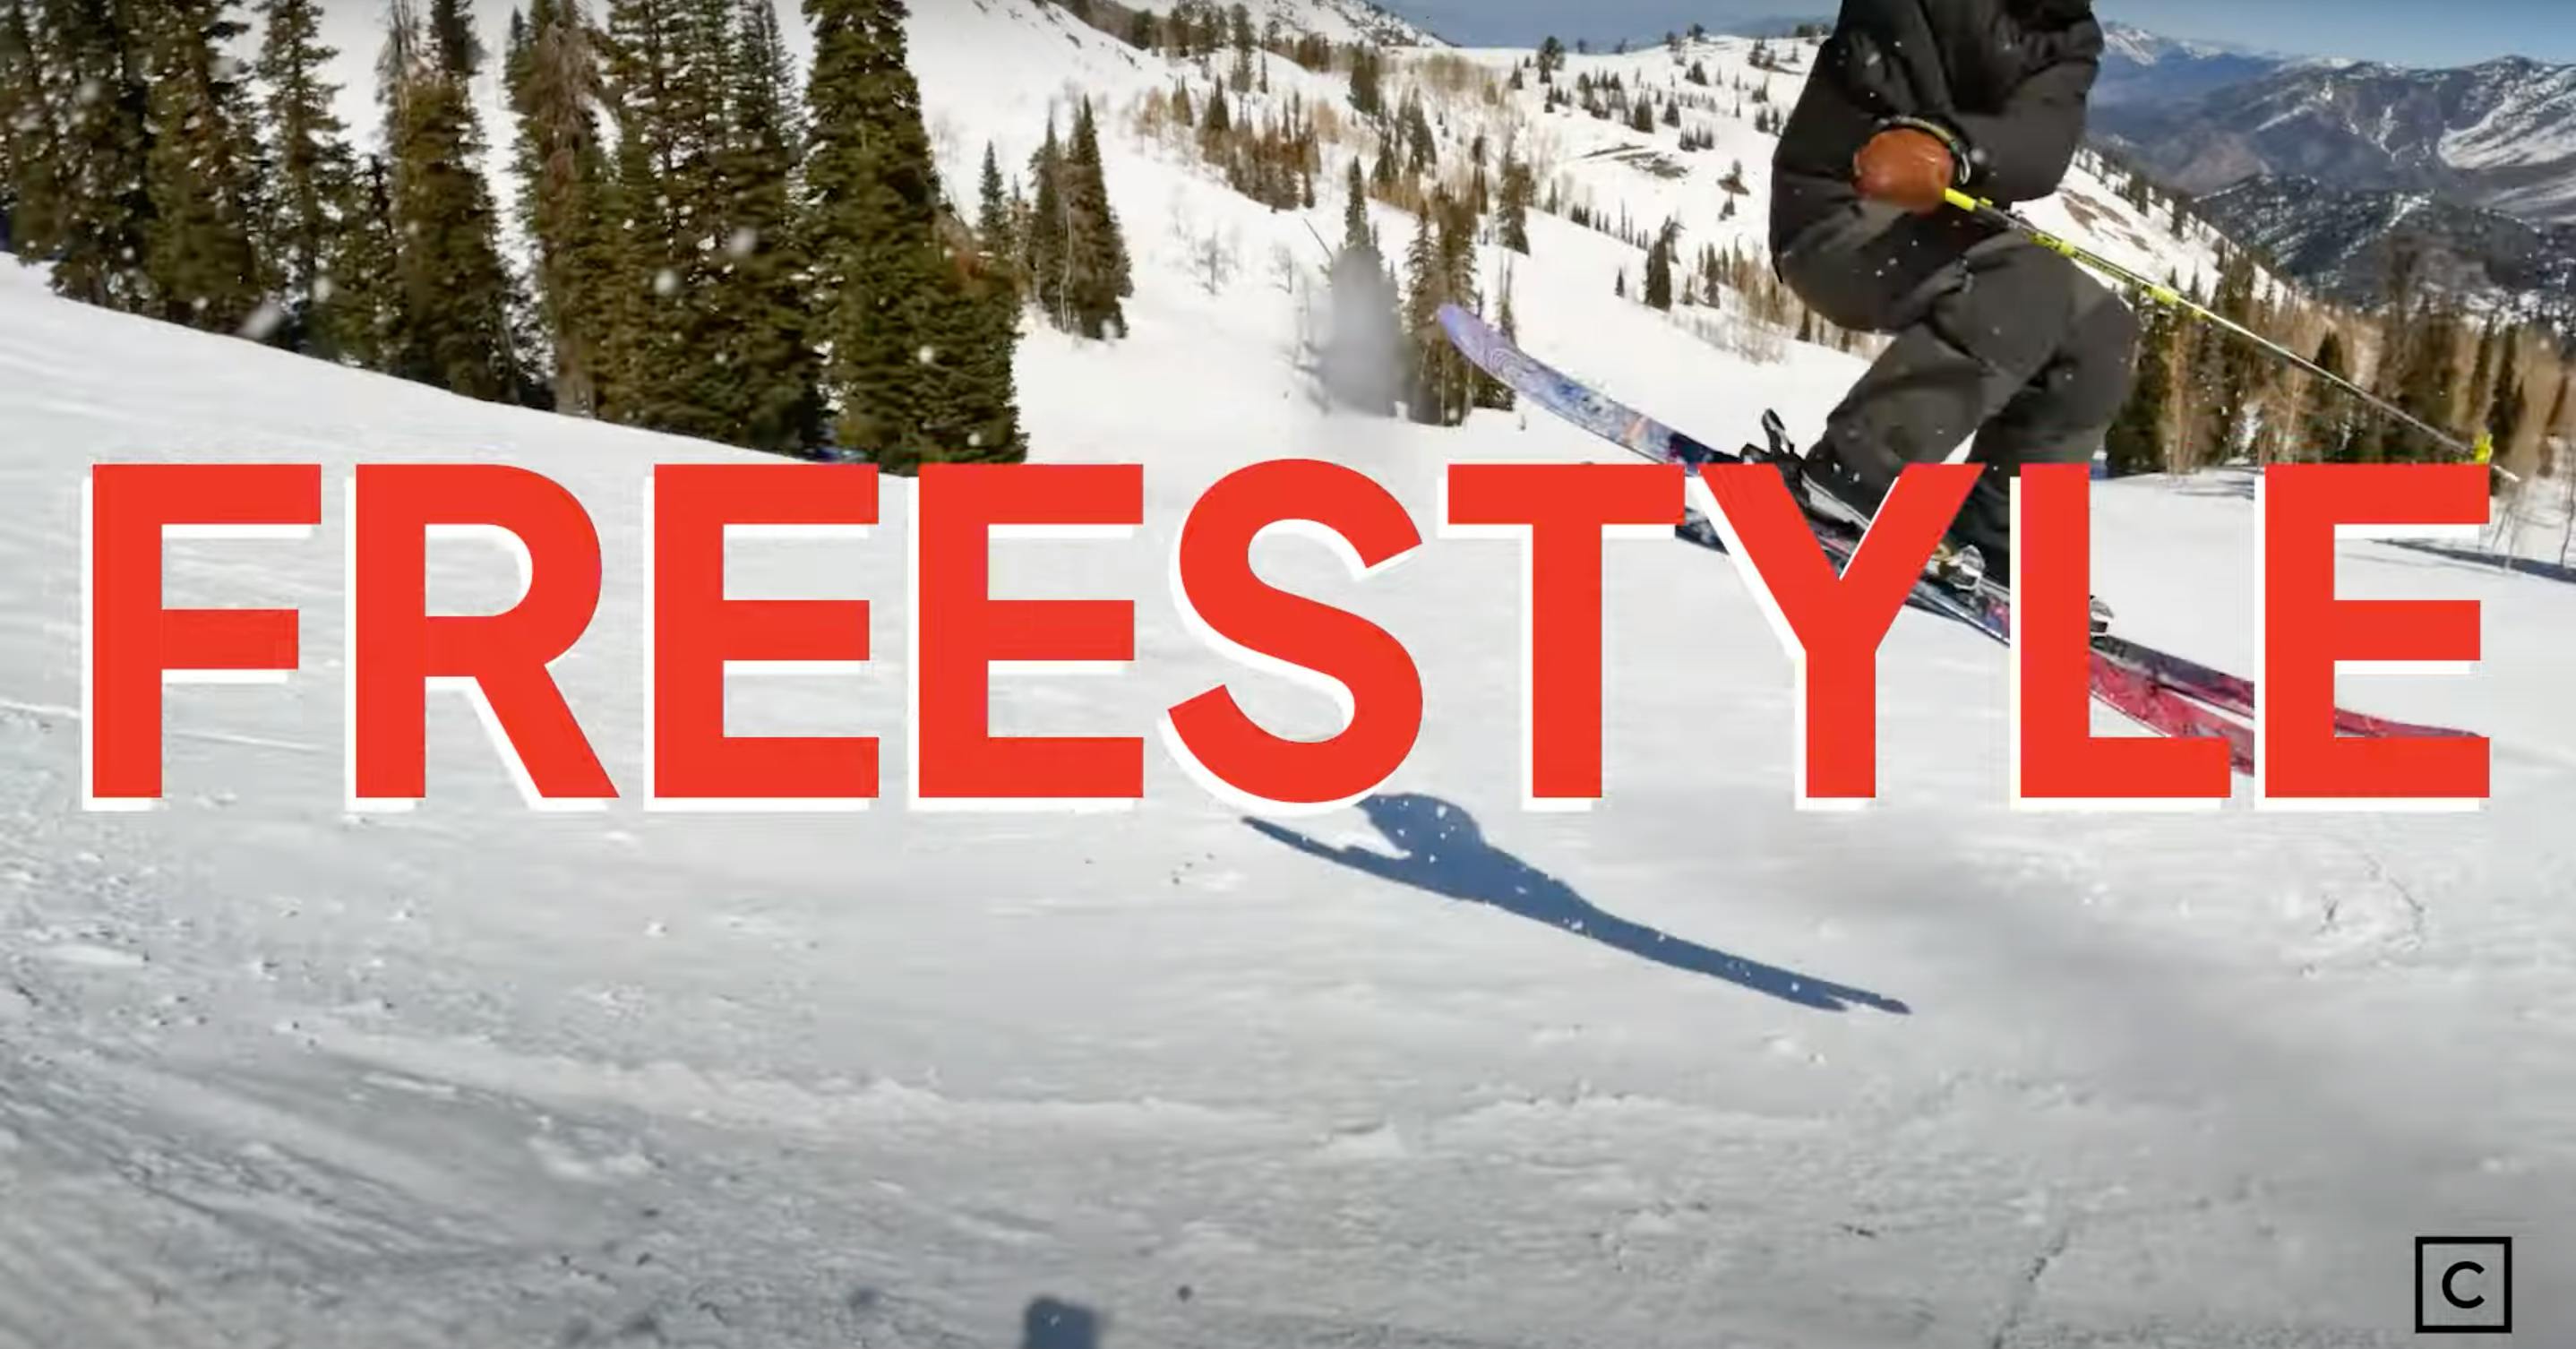 A skier doing a jump with the word "Freestyle" overlayed. 